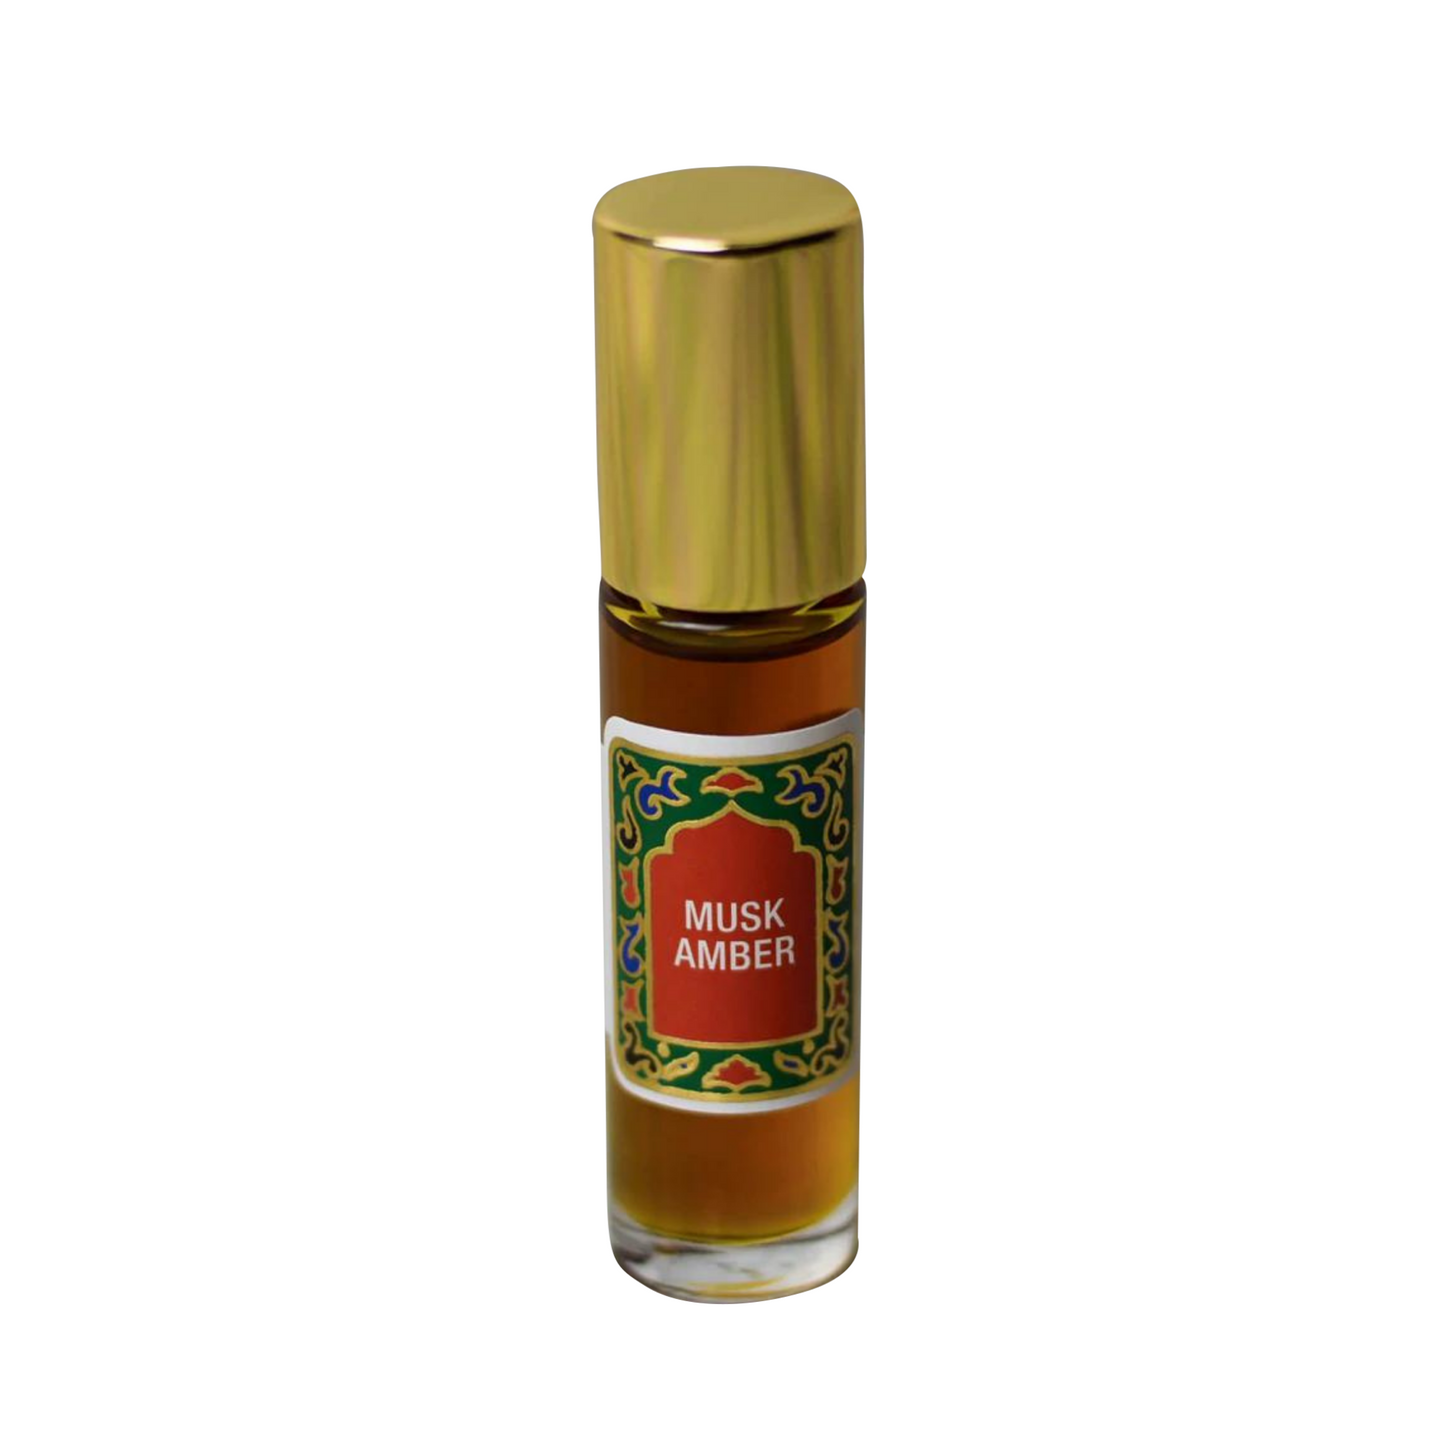 Primary image of Musk Amber Fragrance Roll-On